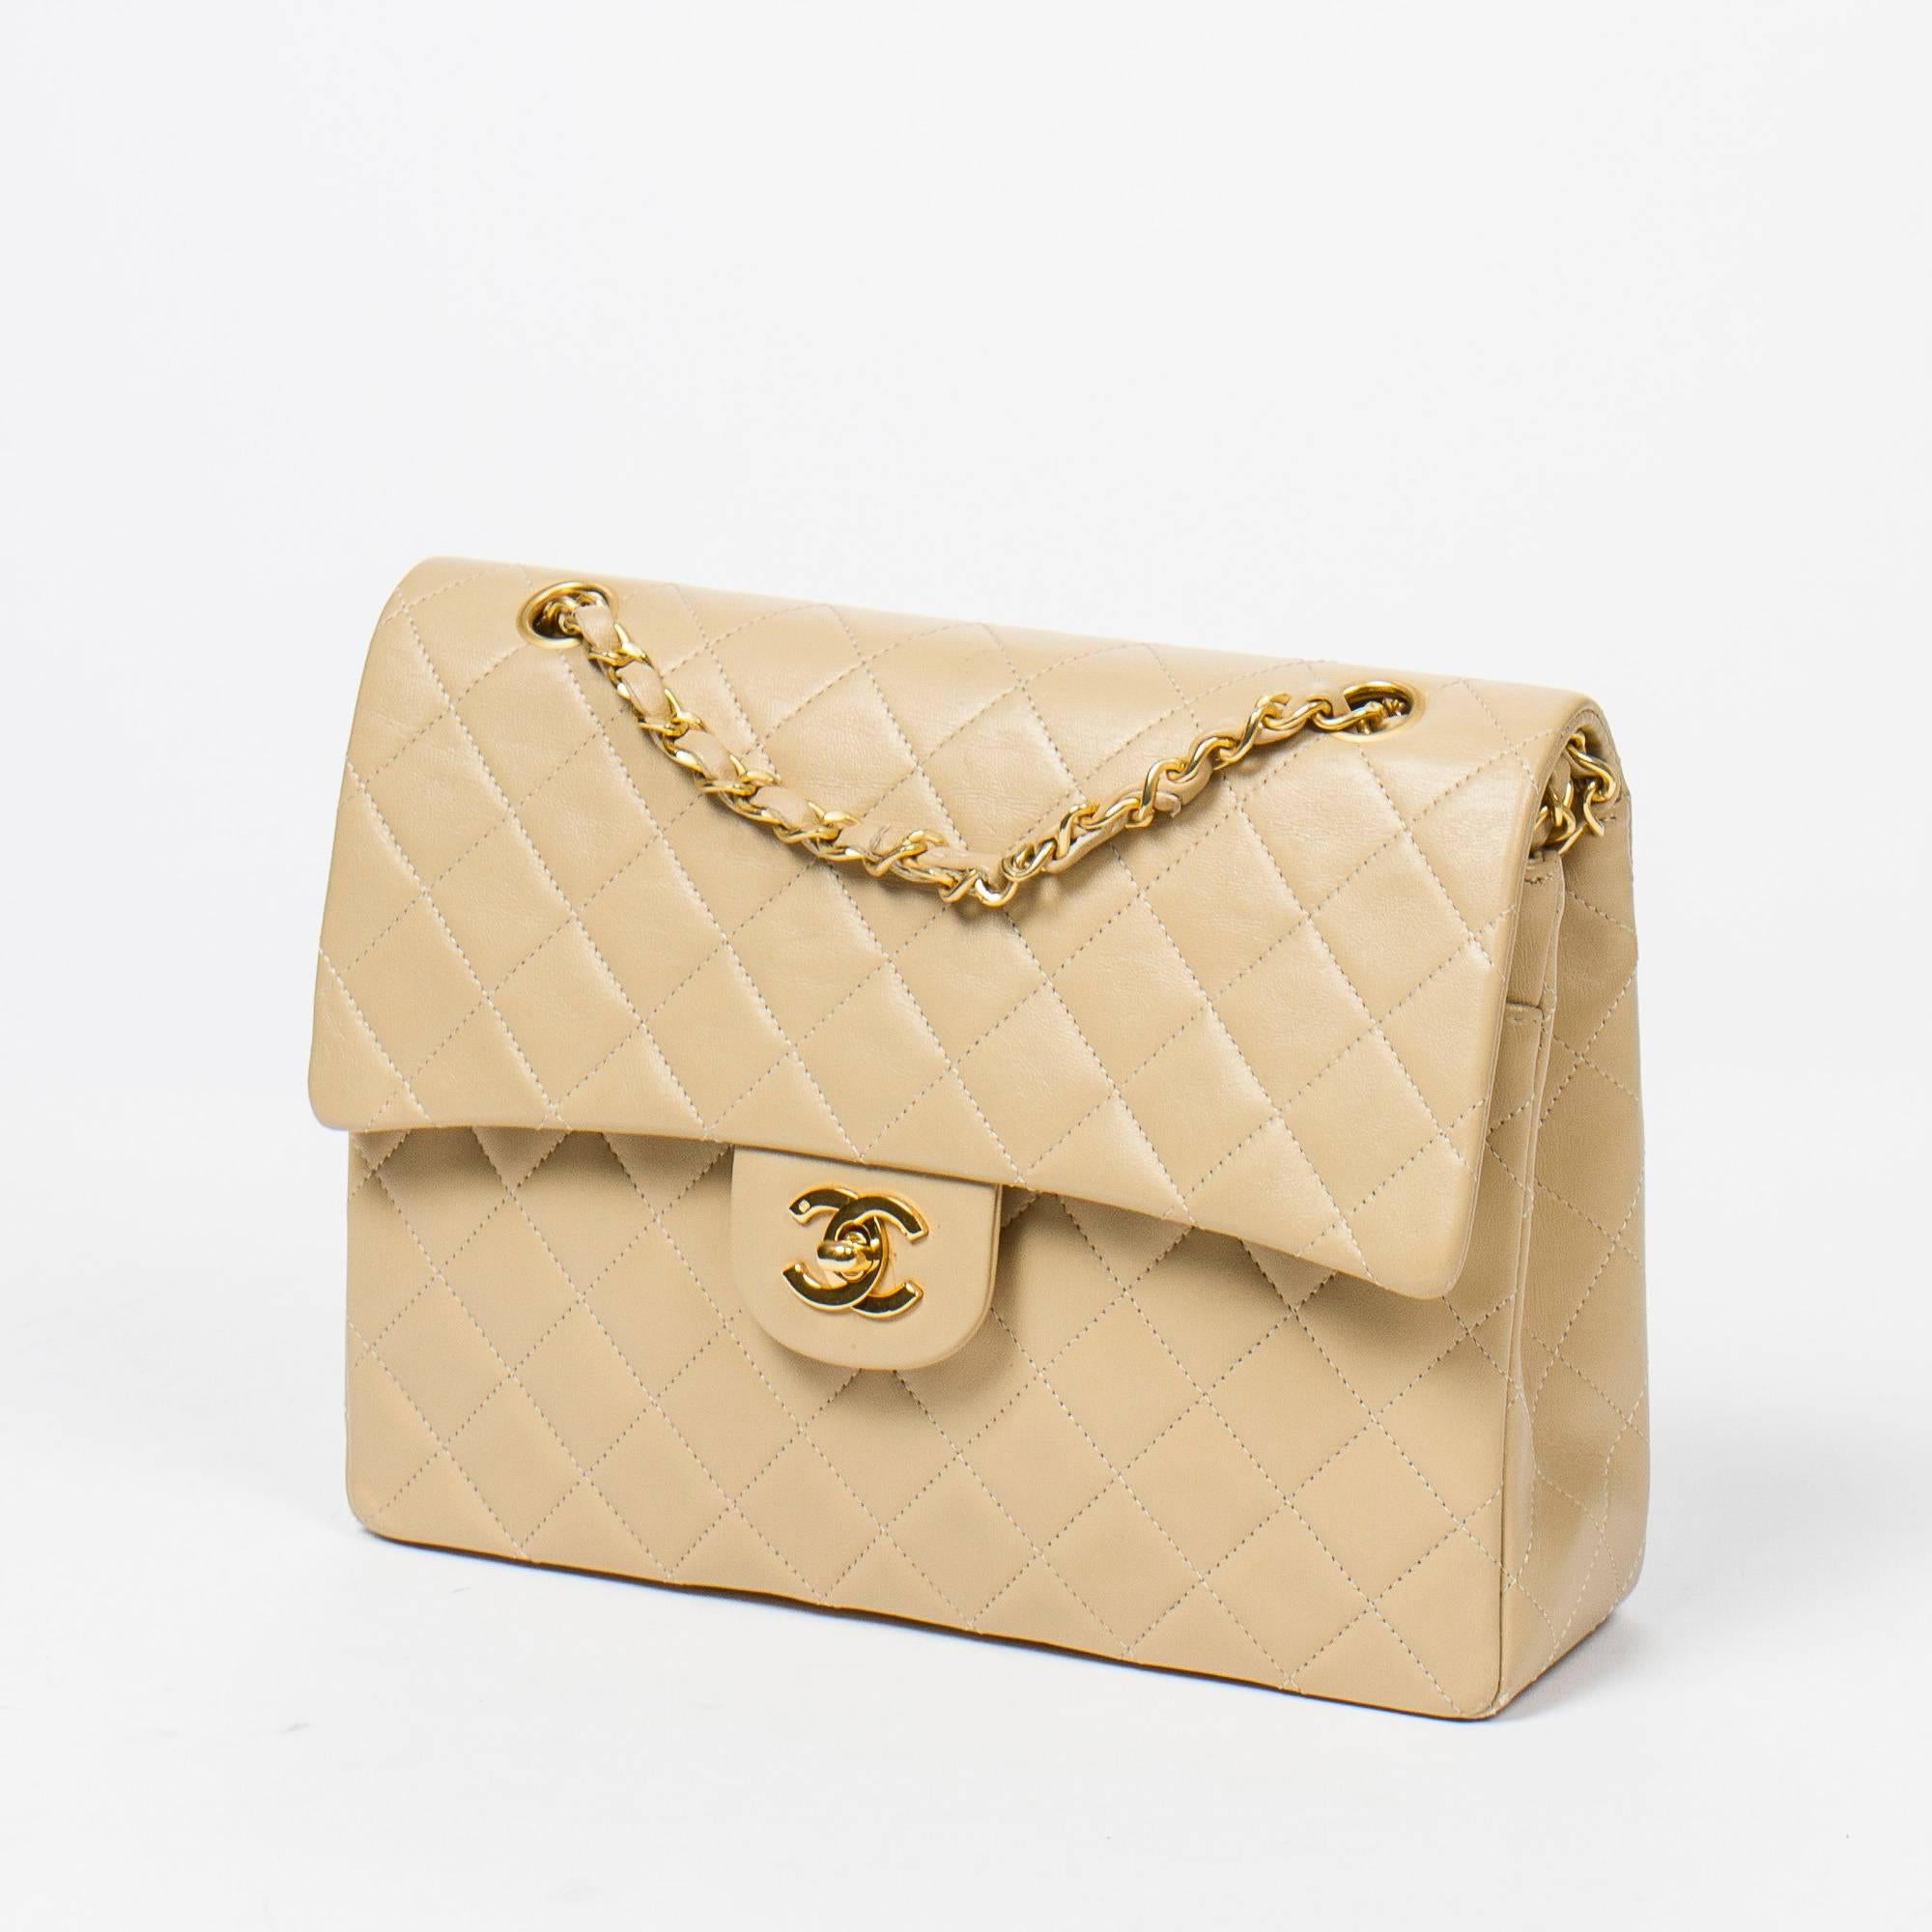 Chanel Tall Double Flap Beige Leather. Date code: 1046956. Model from 1989-1991.
Excellent condition